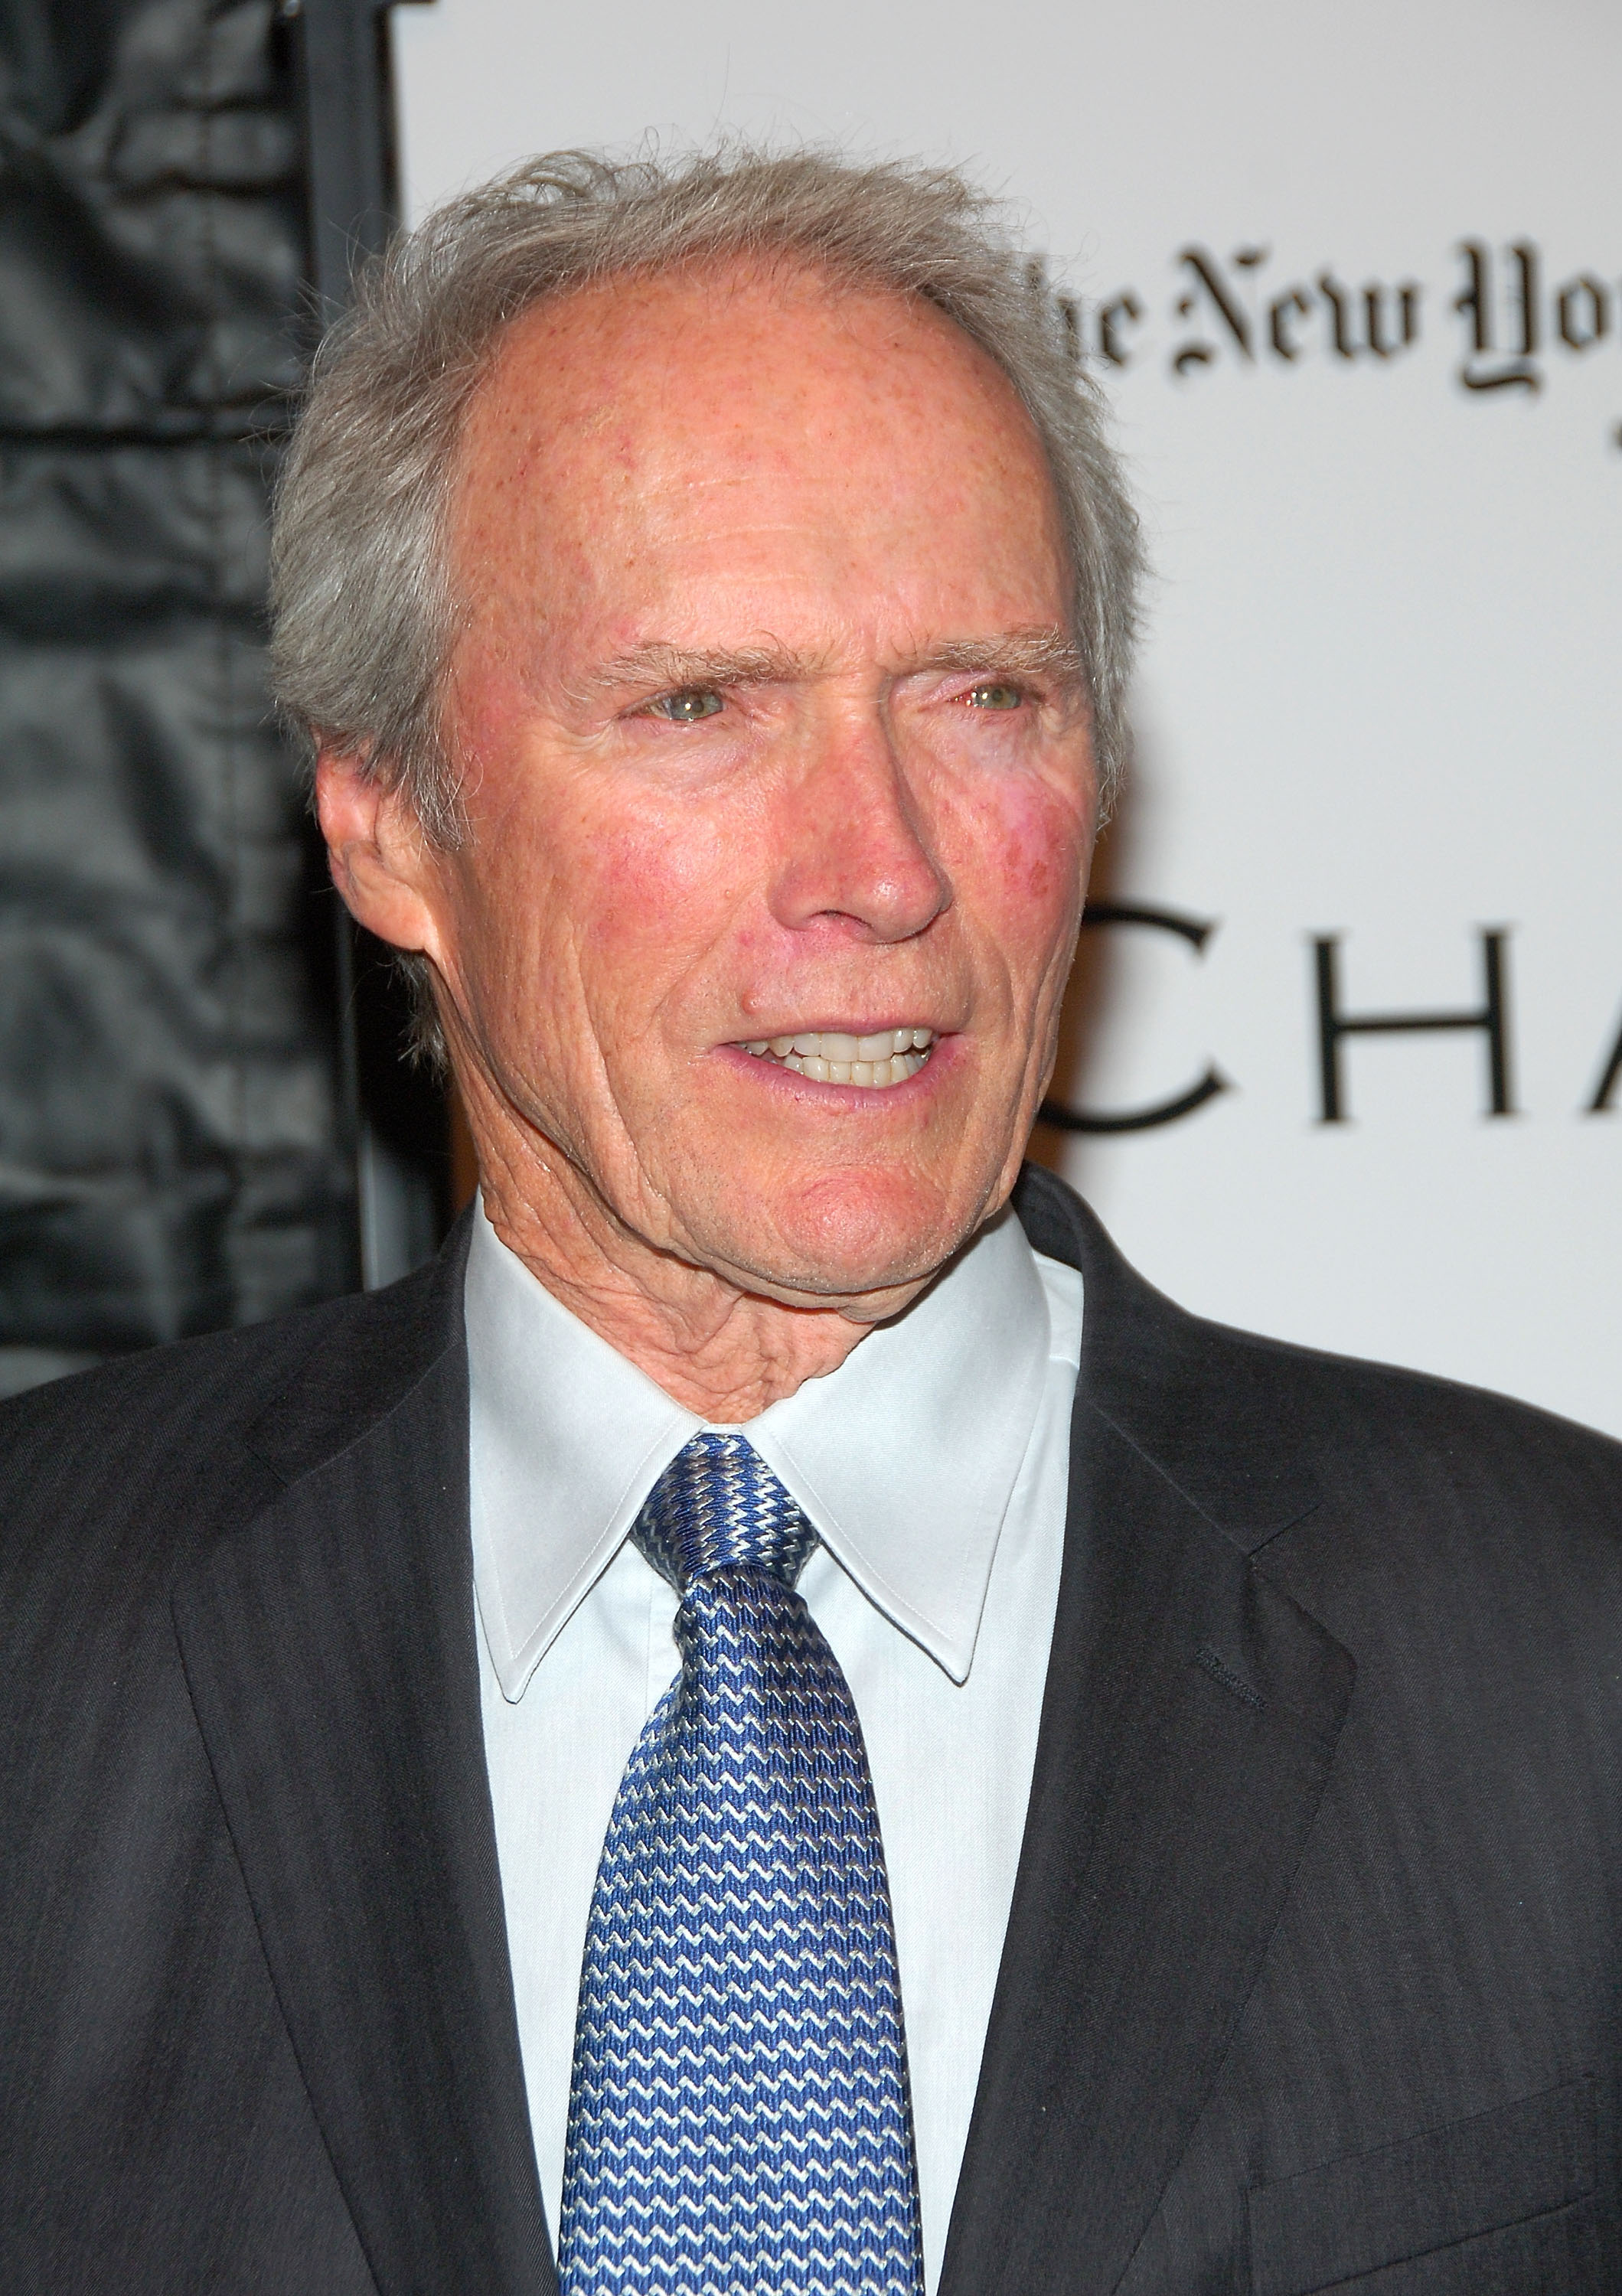 Clint Eastwood attends the premiere of "The Changeling" at Ziegfeld Theater on October 4, 2008 in New York City. | Source: Getty Images